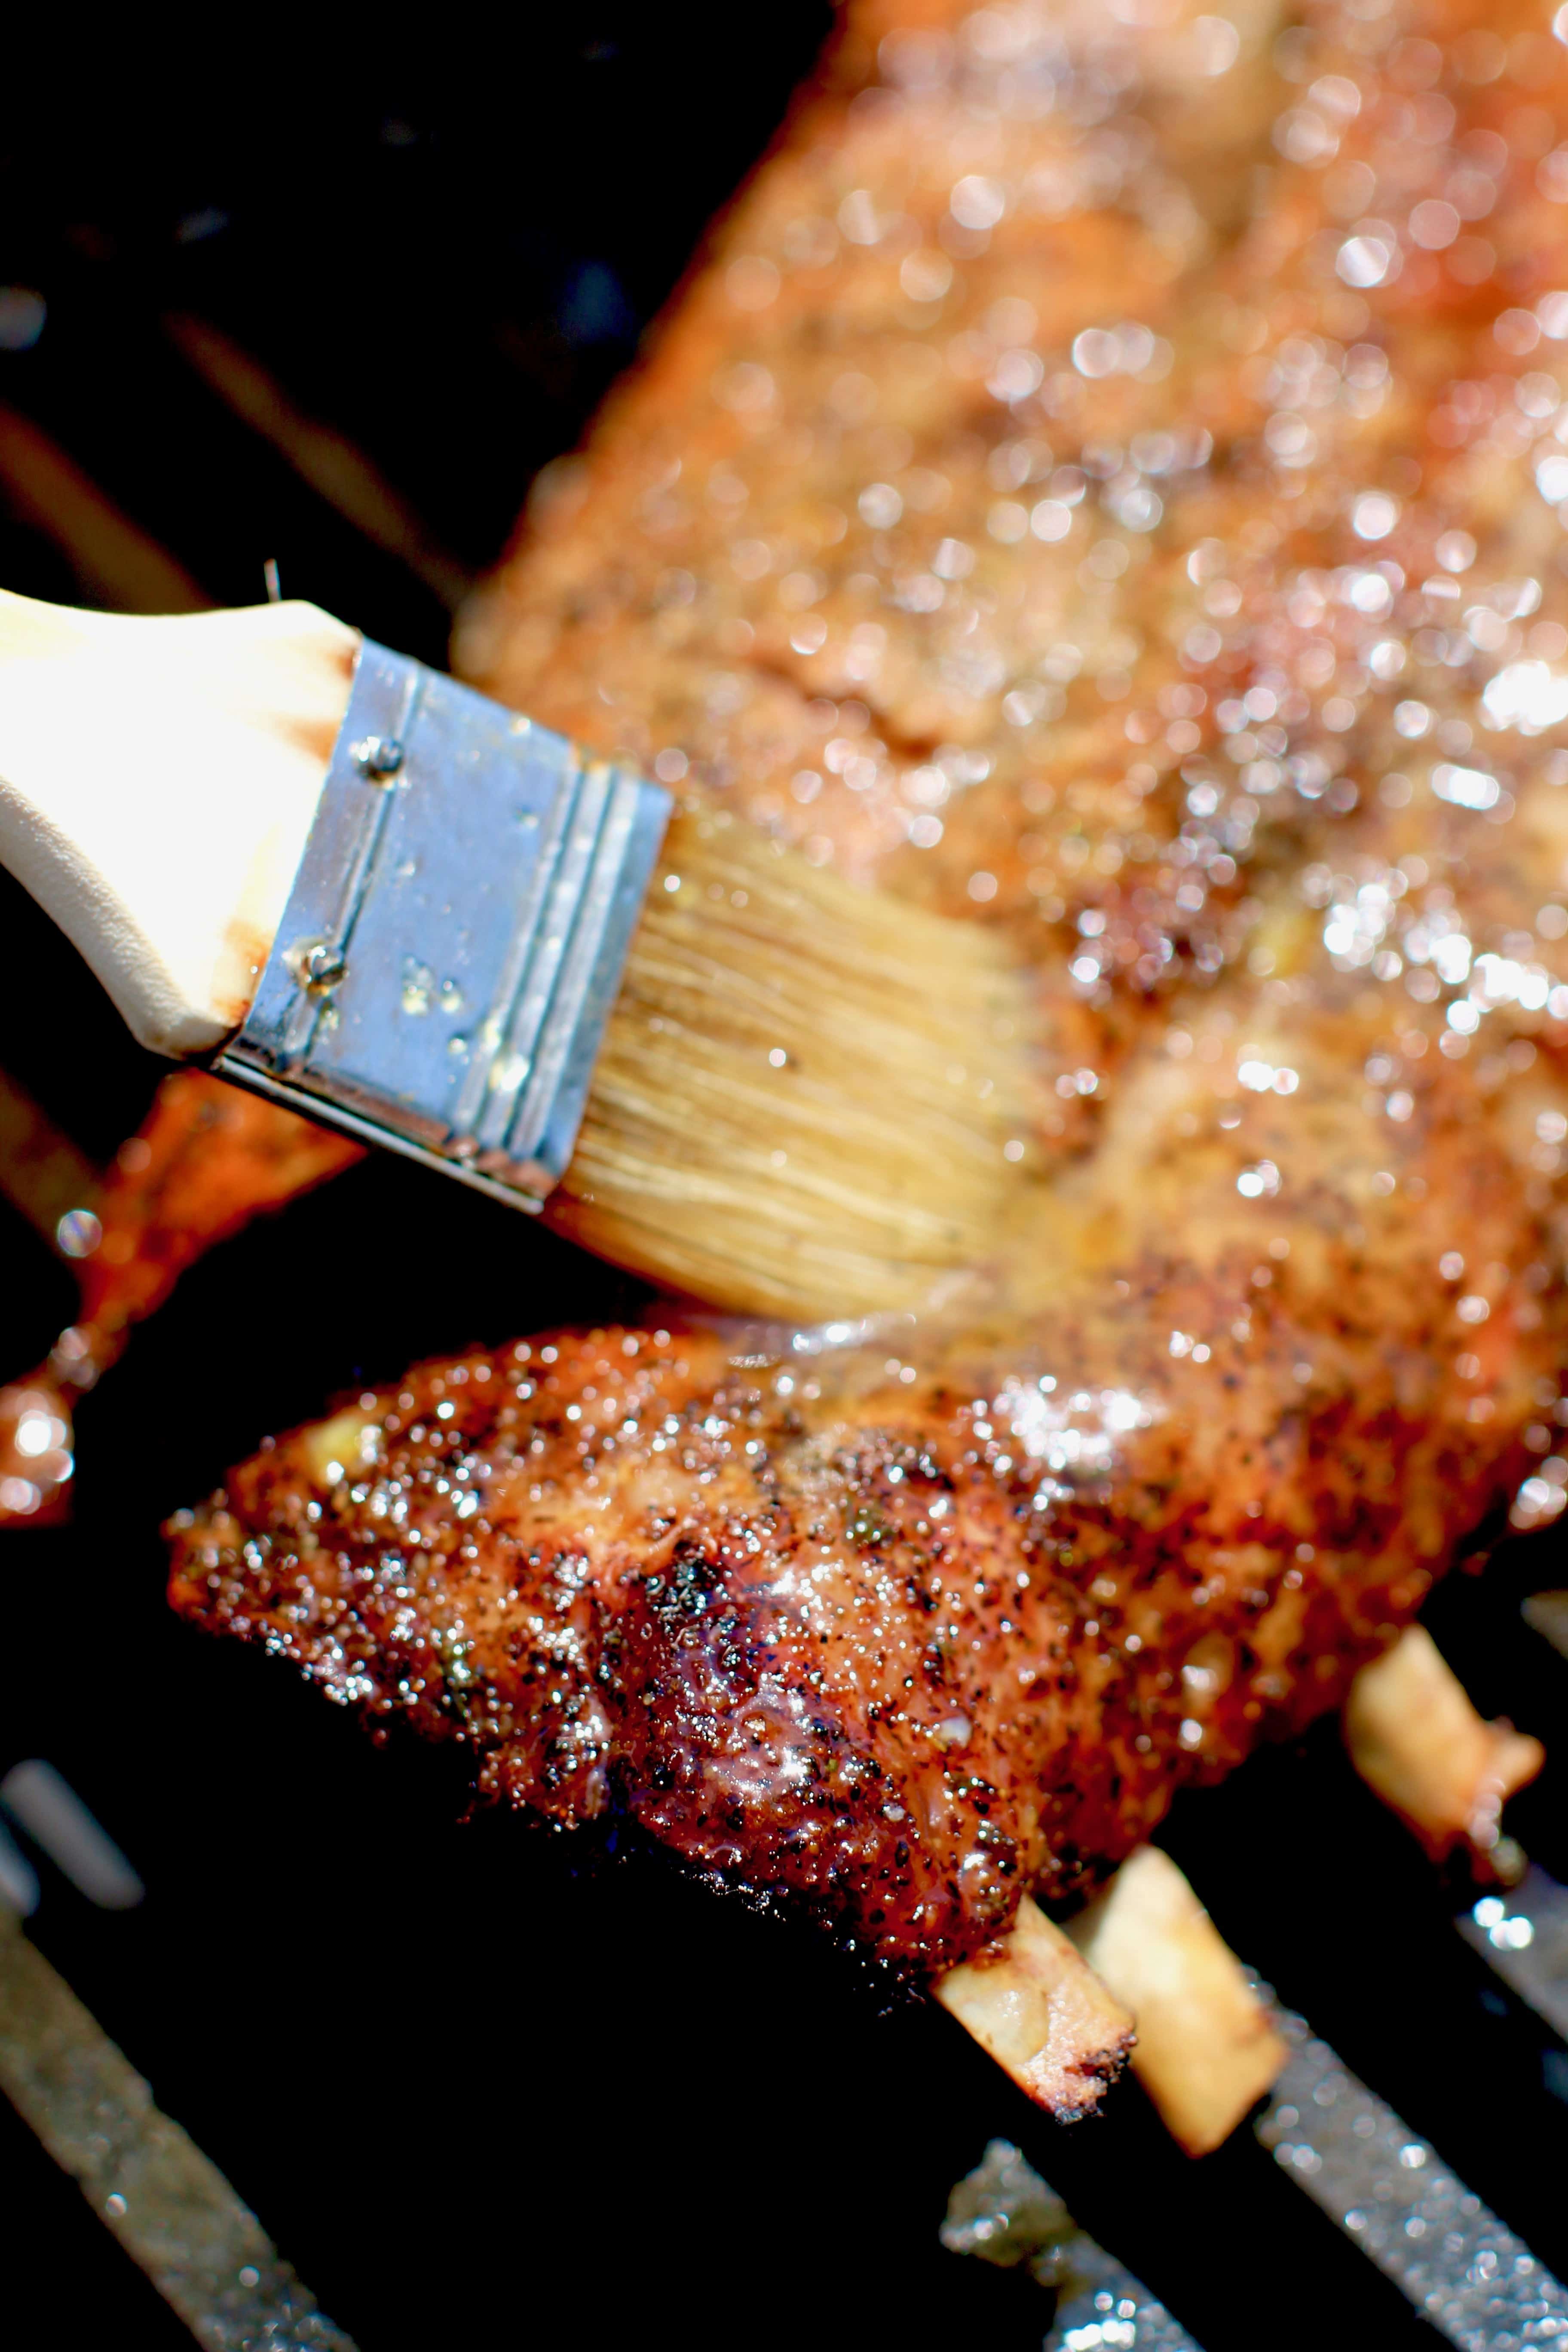 Pork ribs slathered with mop sauce on gas grill.